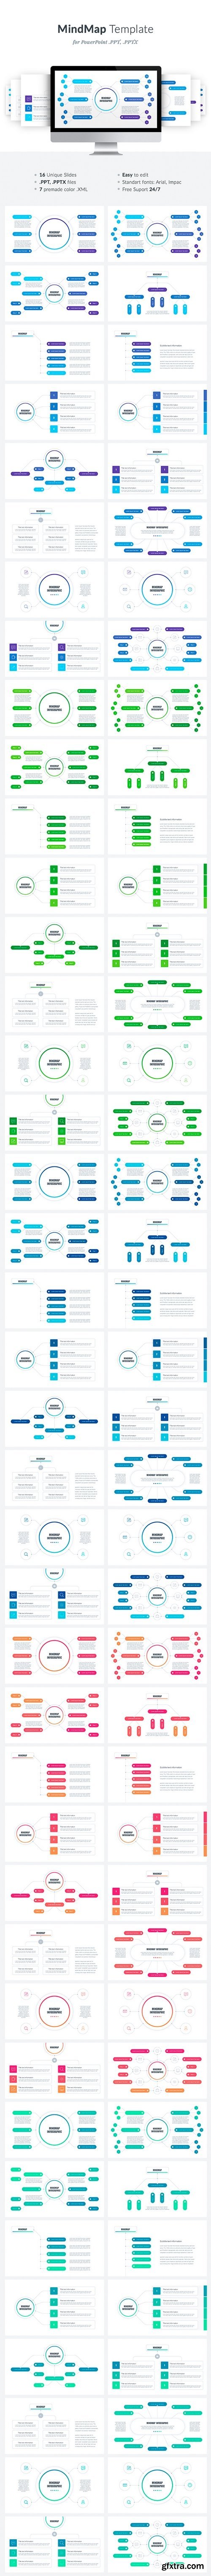 Graphicriver - Mindmap PowerPoint Template 21335478